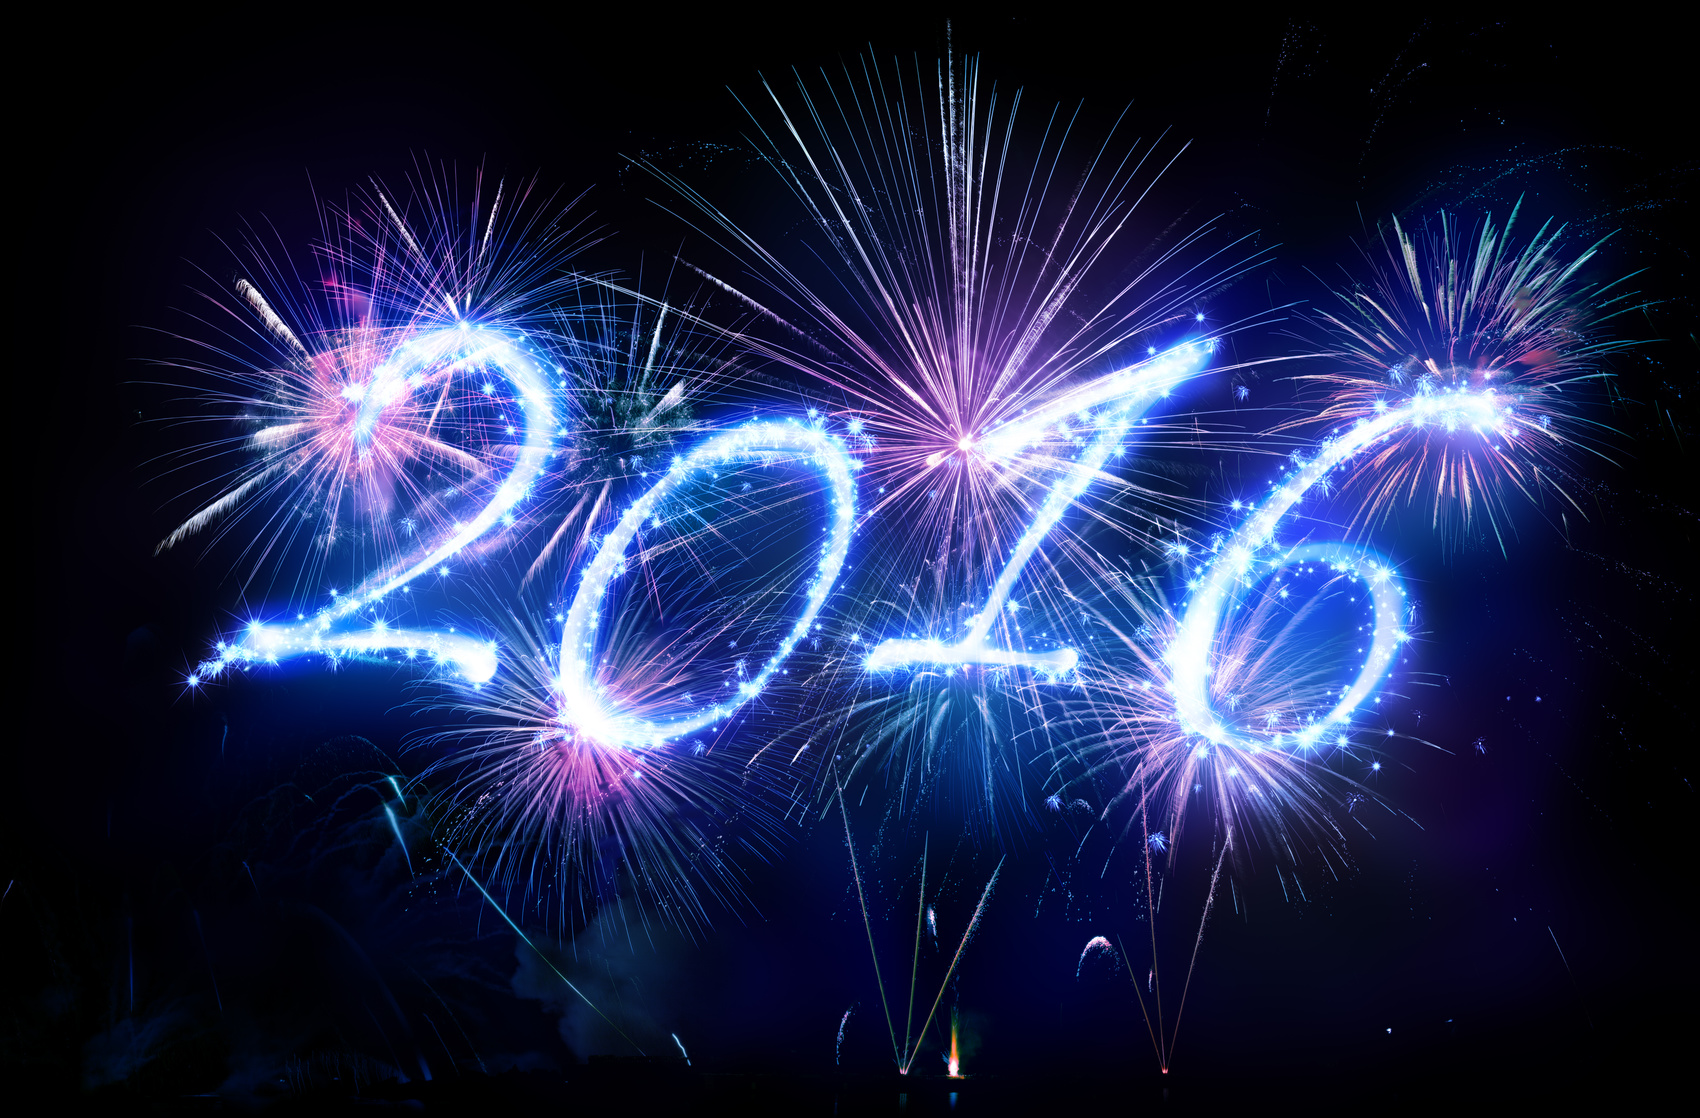 Happy New Year 2016 - Written With Fireworks